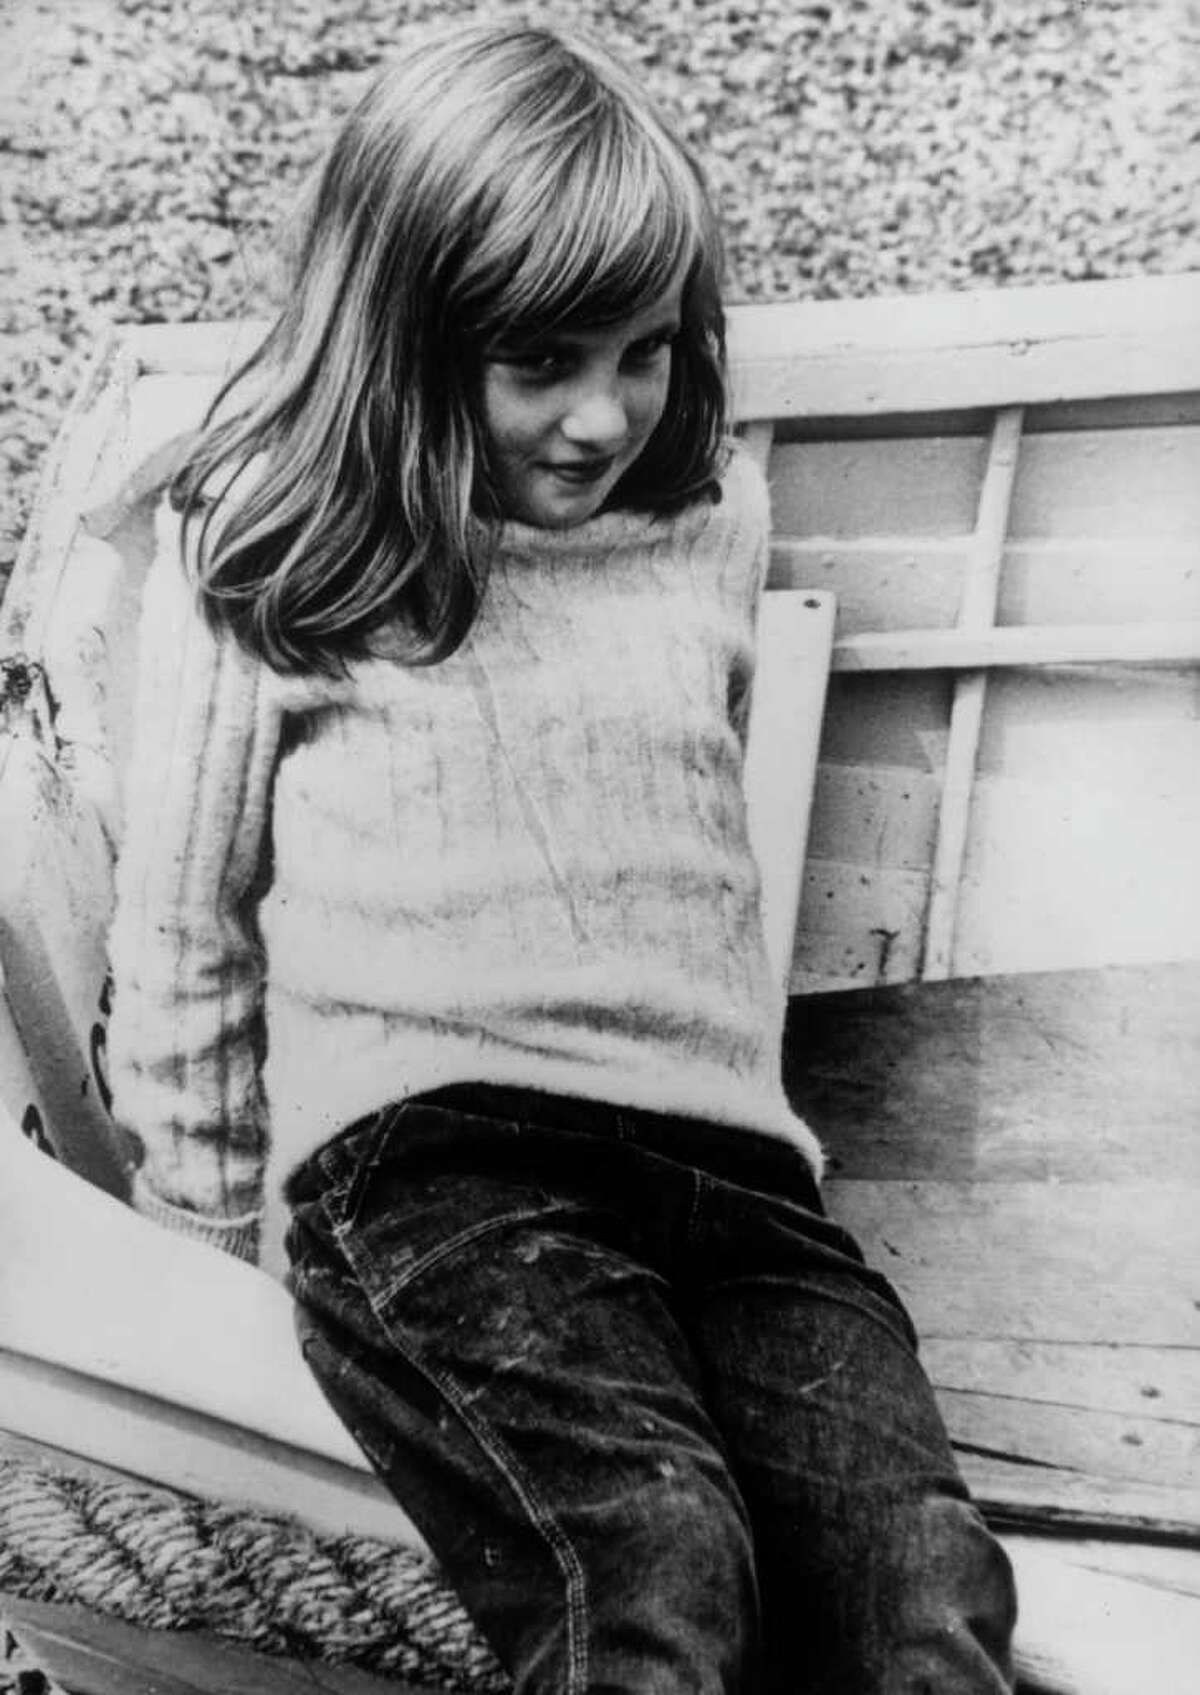 Diana on July 1, 1970, during a holiday at Itchenor in West Sussex.